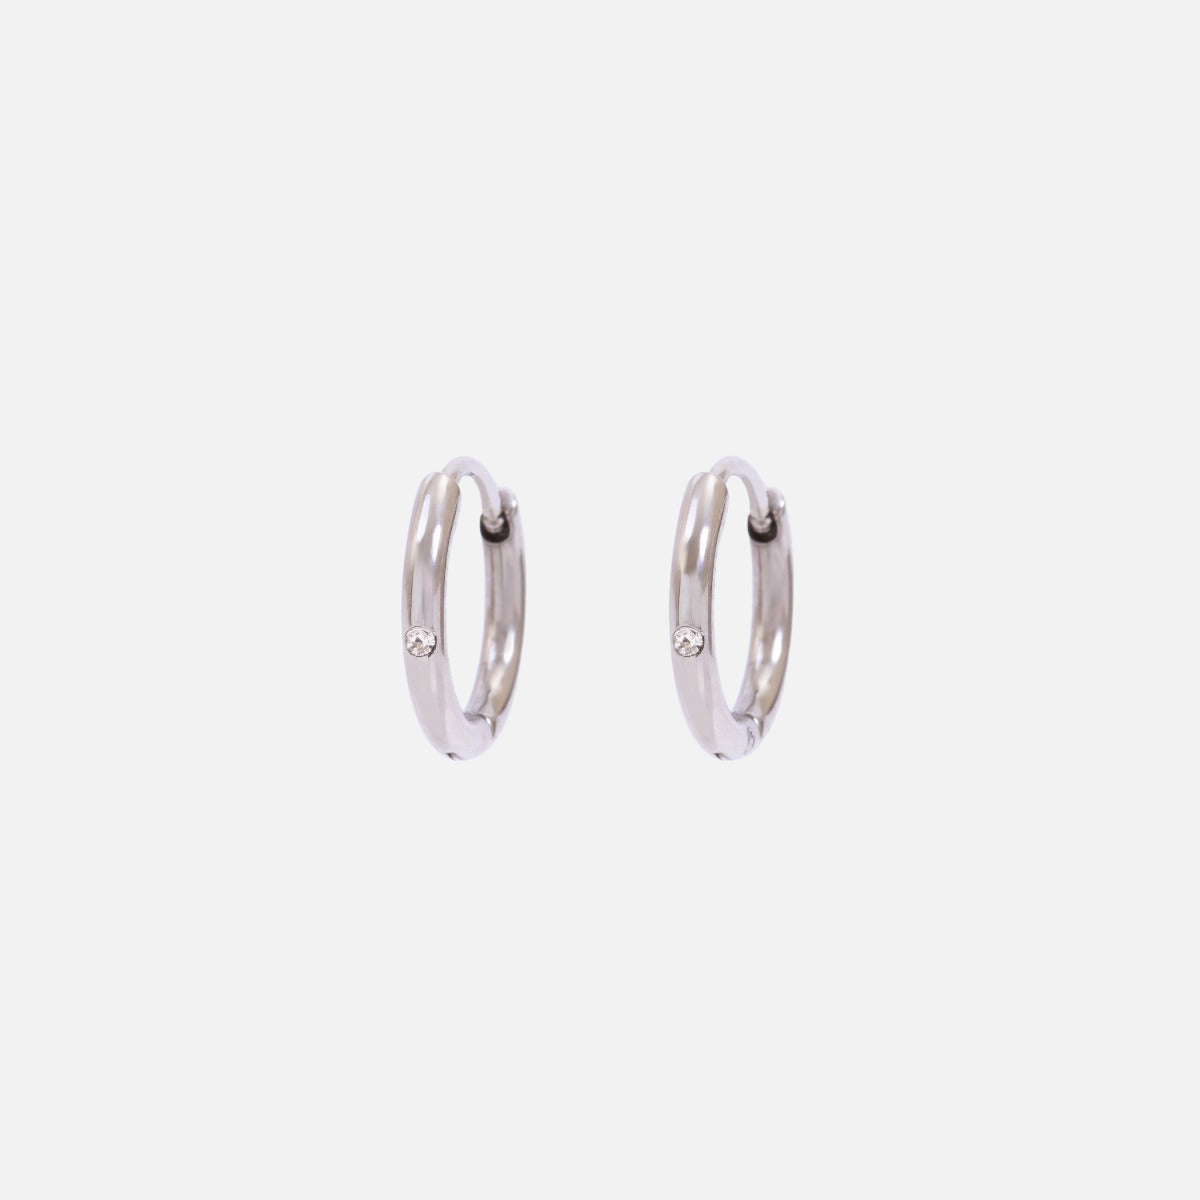 Stainless steel silver hoop earrings with stone insertion